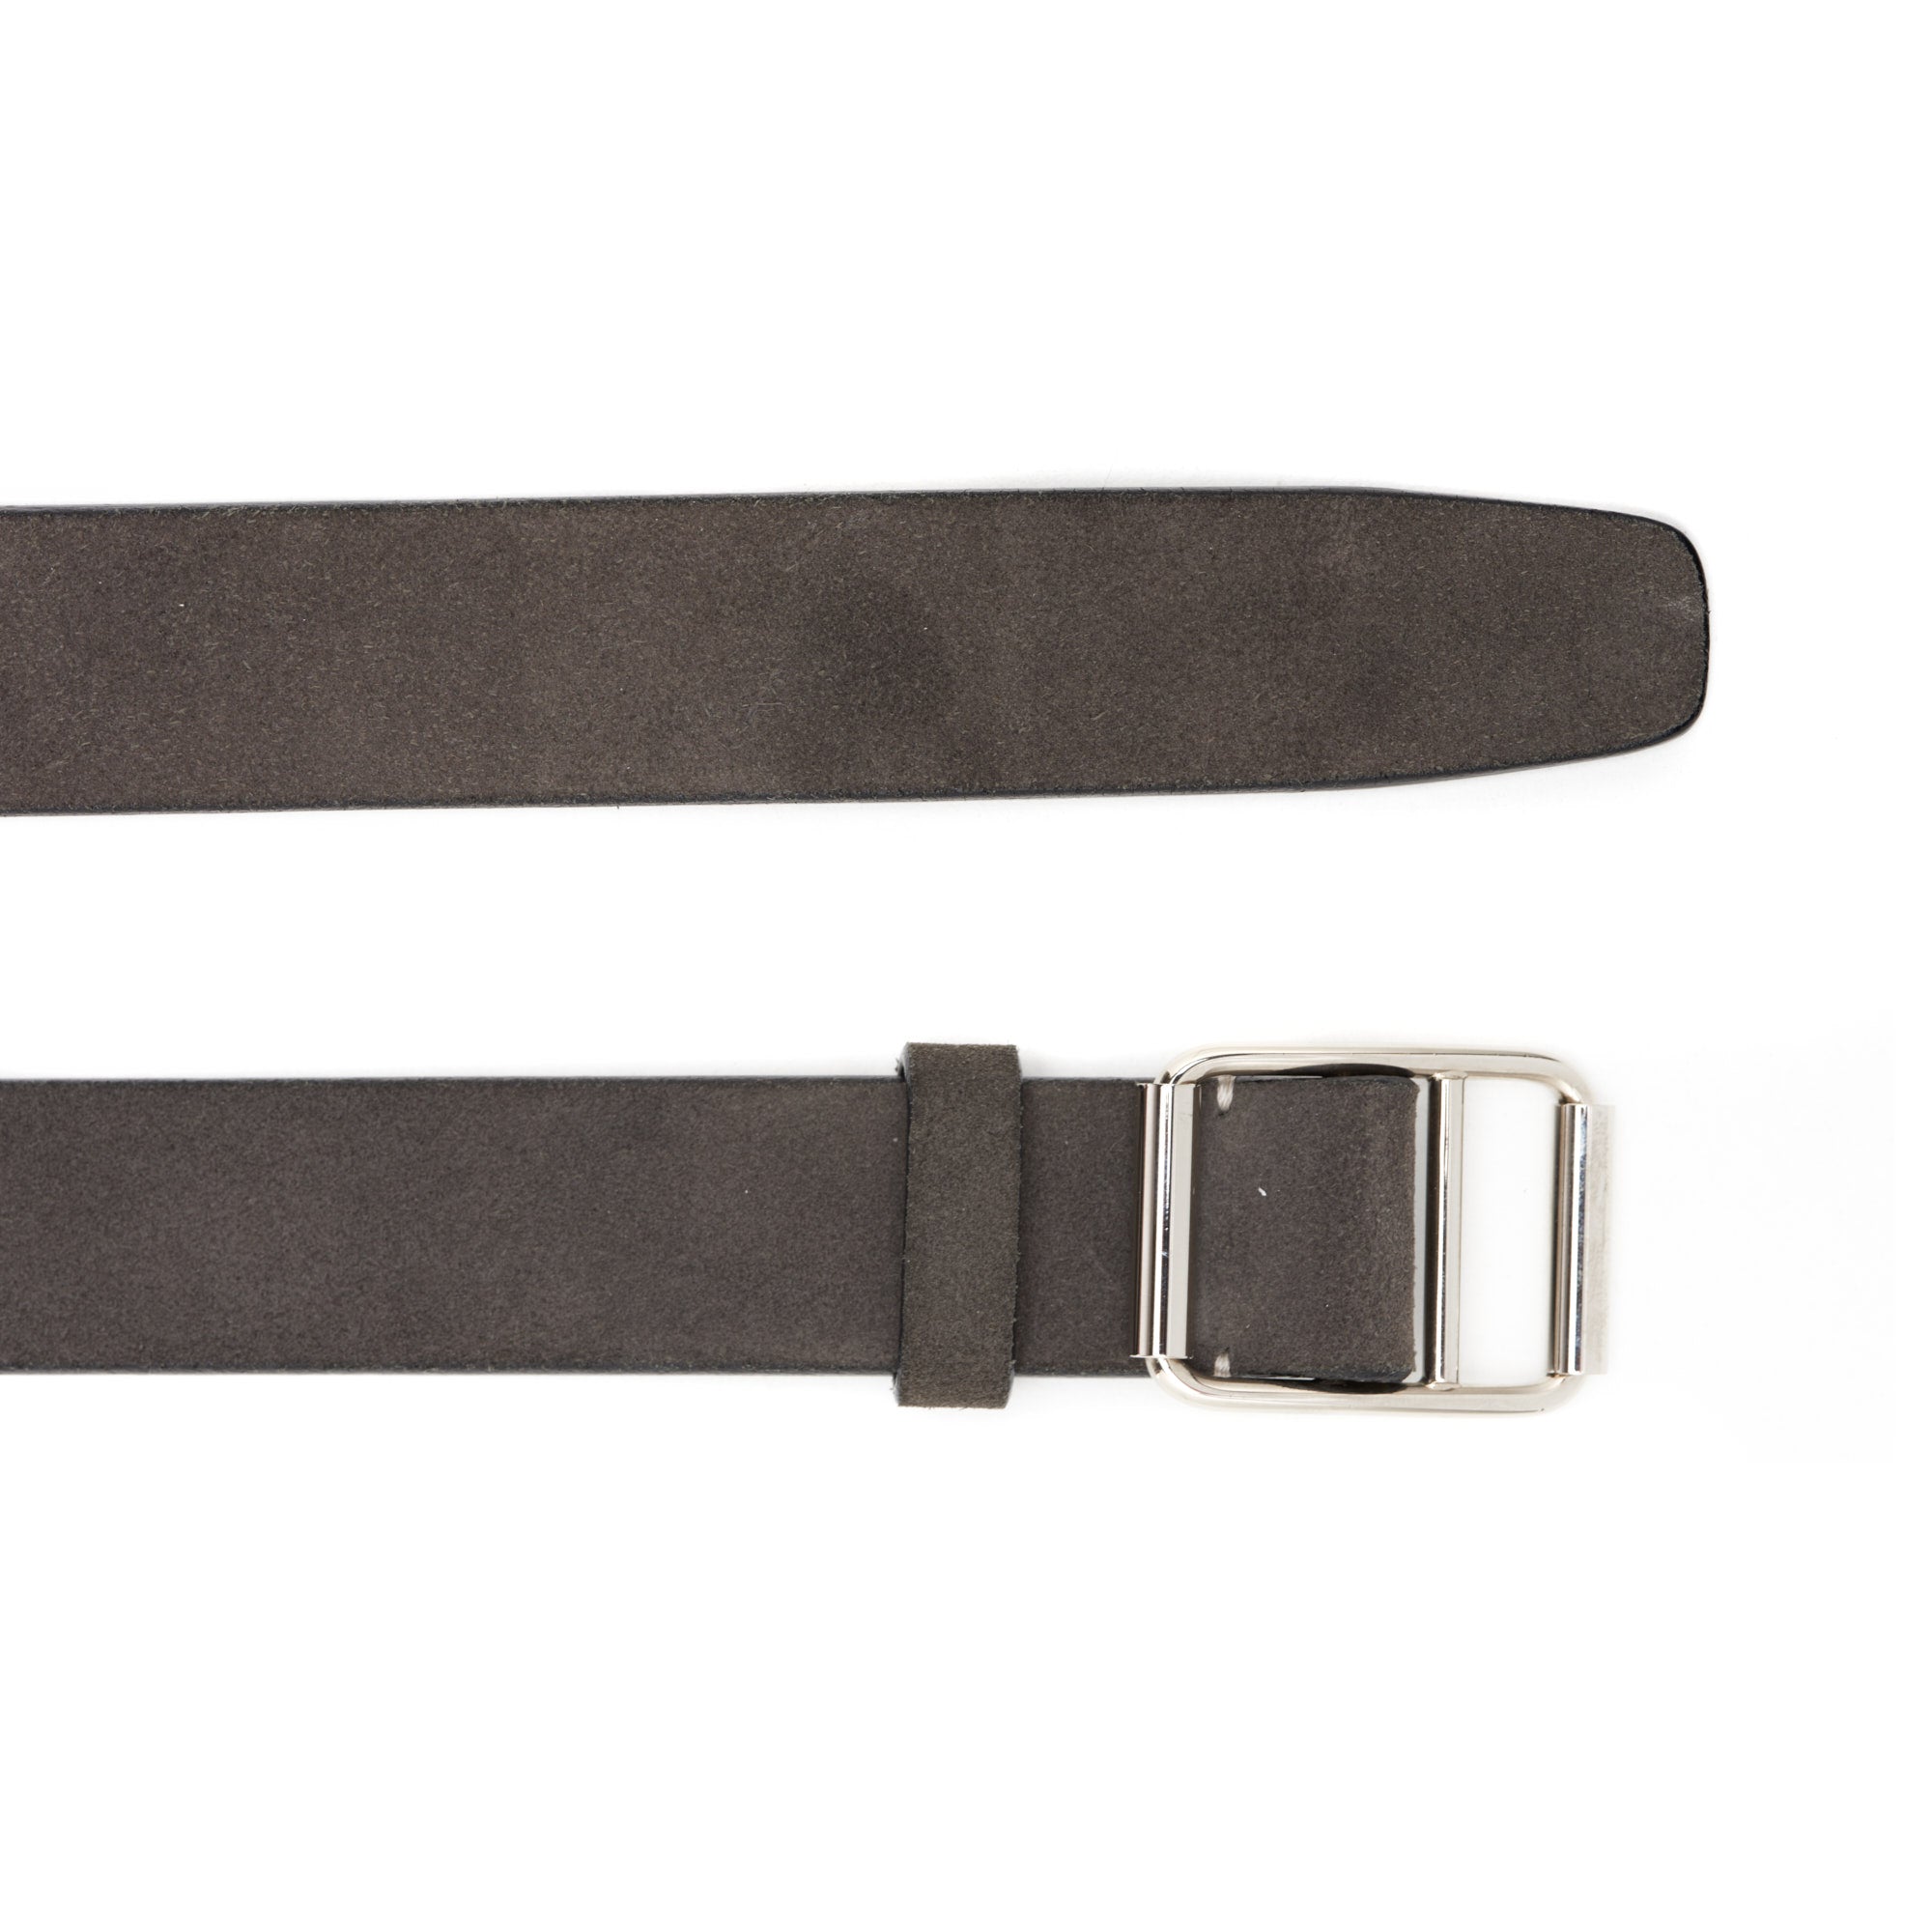 VALEXTRA Gray Suede Leather Belt with Rectangular Buckle 85/100cm/ 33" NEW VALEXTRA